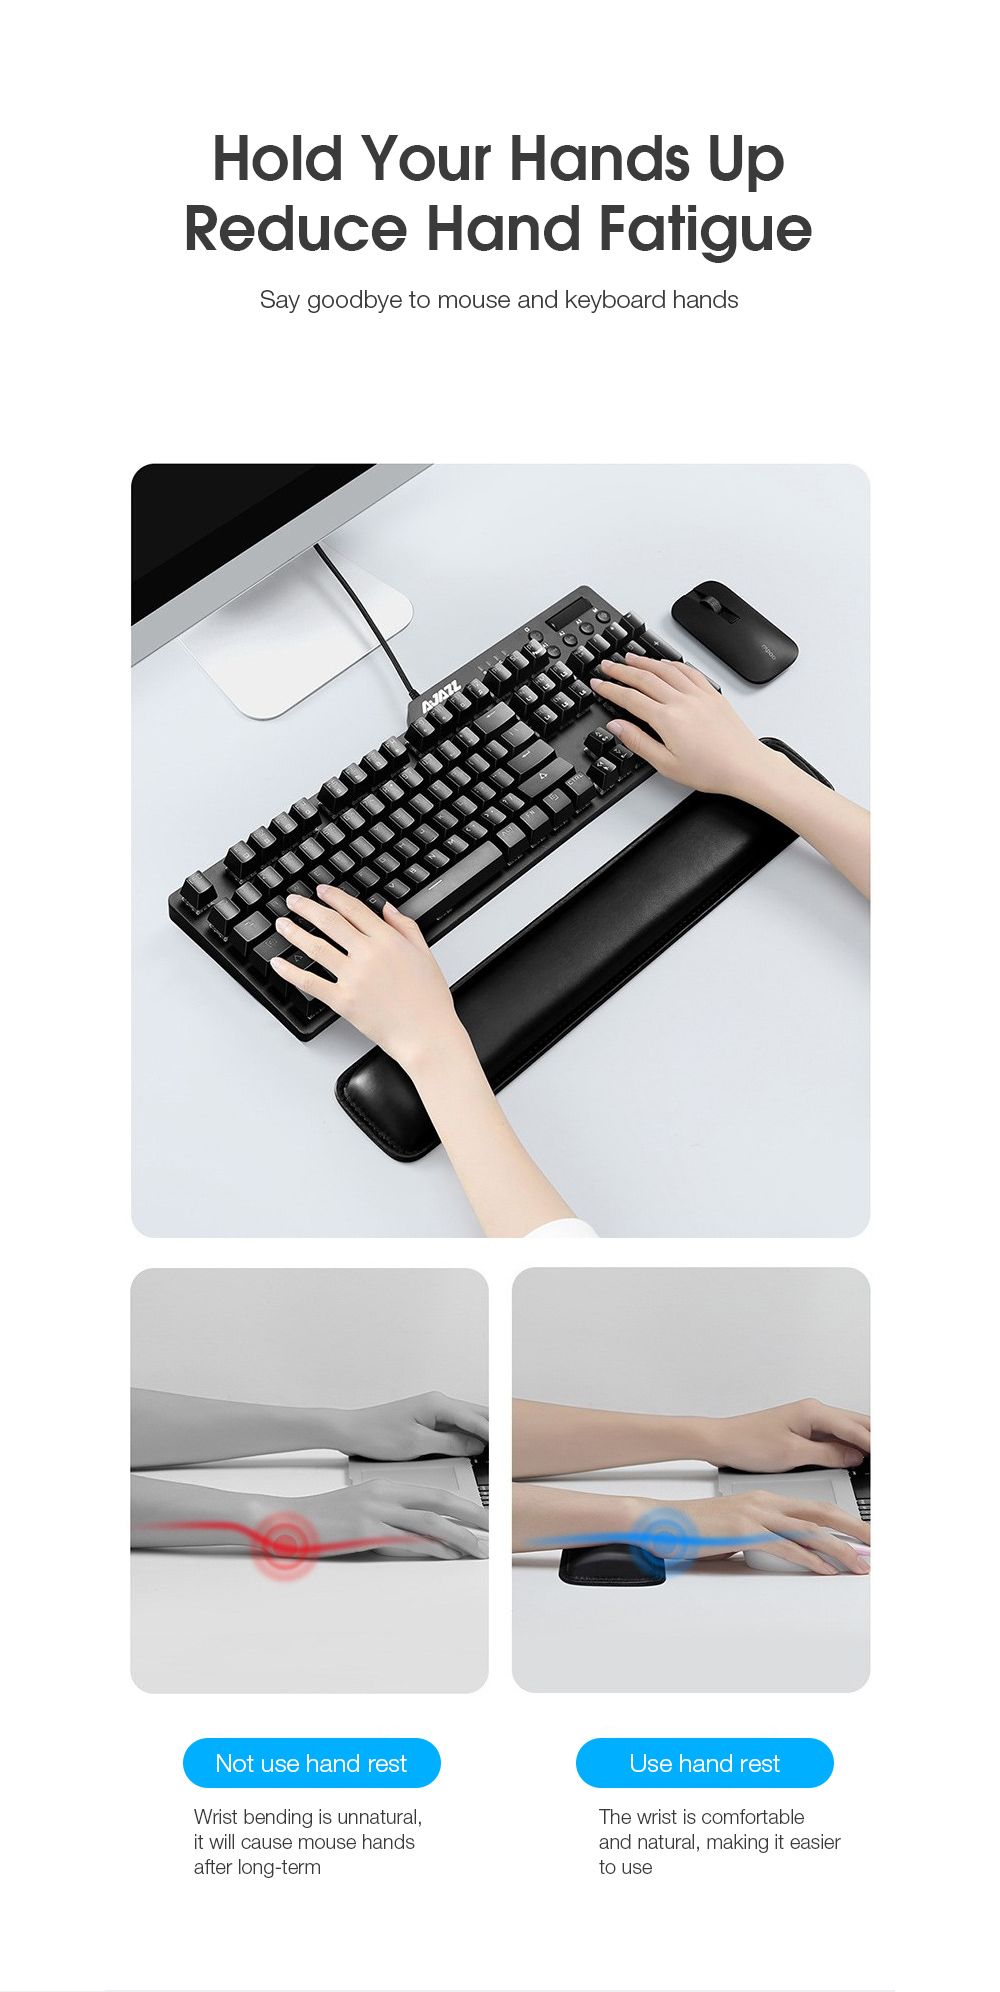 BUBM-Leather-Wrist-Support-Keyboard-and-Mouse-Wrist-Rest-Pad-Hand-Palm-Rest-Support-for-Typing-Gamin-1731274